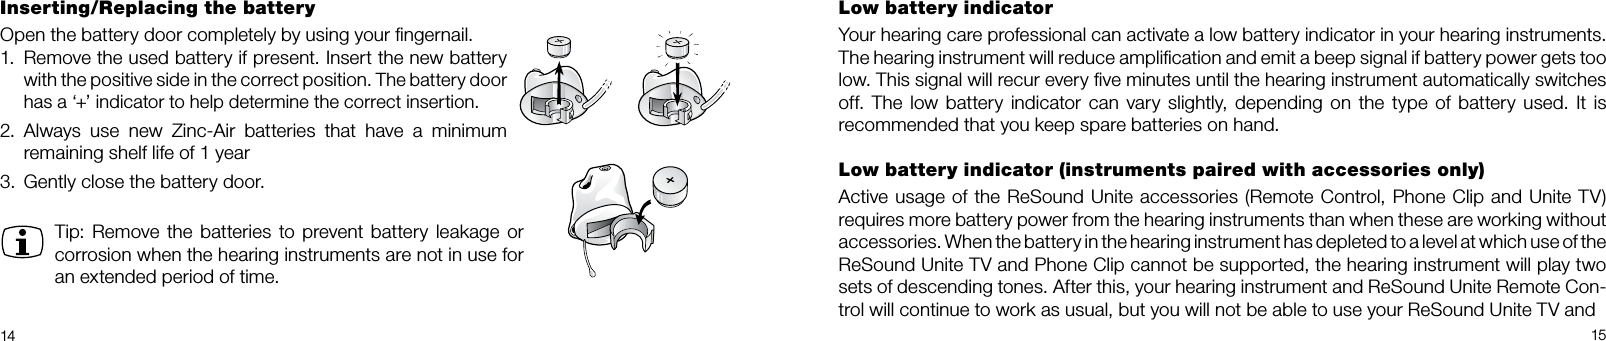 14 15Low battery indicatorYour hearing care professional can activate a low battery indicator in your hearing instruments.  The hearing instrument will reduce ampliﬁcation and emit a beep signal if battery power gets too low. This signal will recur every ﬁve minutes until the hearing instrument automatically switches off.  The low  battery indicator  can vary  slightly,  depending  on the type  of  battery  used. It is  recommended that you keep spare batteries on hand. Low battery indicator (instruments paired with accessories only)Active usage of the ReSound Unite accessories (Remote Control, Phone Clip and Unite TV)requires more battery power from the hearing instruments than when these are working without  accessories. When the battery in the hearing instrument has depleted to a level at which use of the  ReSound Unite TV and Phone Clip cannot be supported, the hearing instrument will play two sets of descending tones. After this, your hearing instrument and ReSound Unite Remote Con-trol will continue to work as usual, but you will not be able to use your ReSound Unite TV andInserting/Replacing the batteryOpen the battery door completely by using your ﬁngernail. 1.  Remove the used battery if present. Insert the new battery with the positive side in the correct position. The battery door has a ‘+’ indicator to help determine the correct insertion.2.   Always  use  new  Zinc-Air  batteries  that  have  a  minimum remaining shelf life of 1 year3.  Gently close the battery door.Tip: Remove the batteries to prevent battery leakage  or corrosion when the hearing instruments are not in use for an extended period of time.